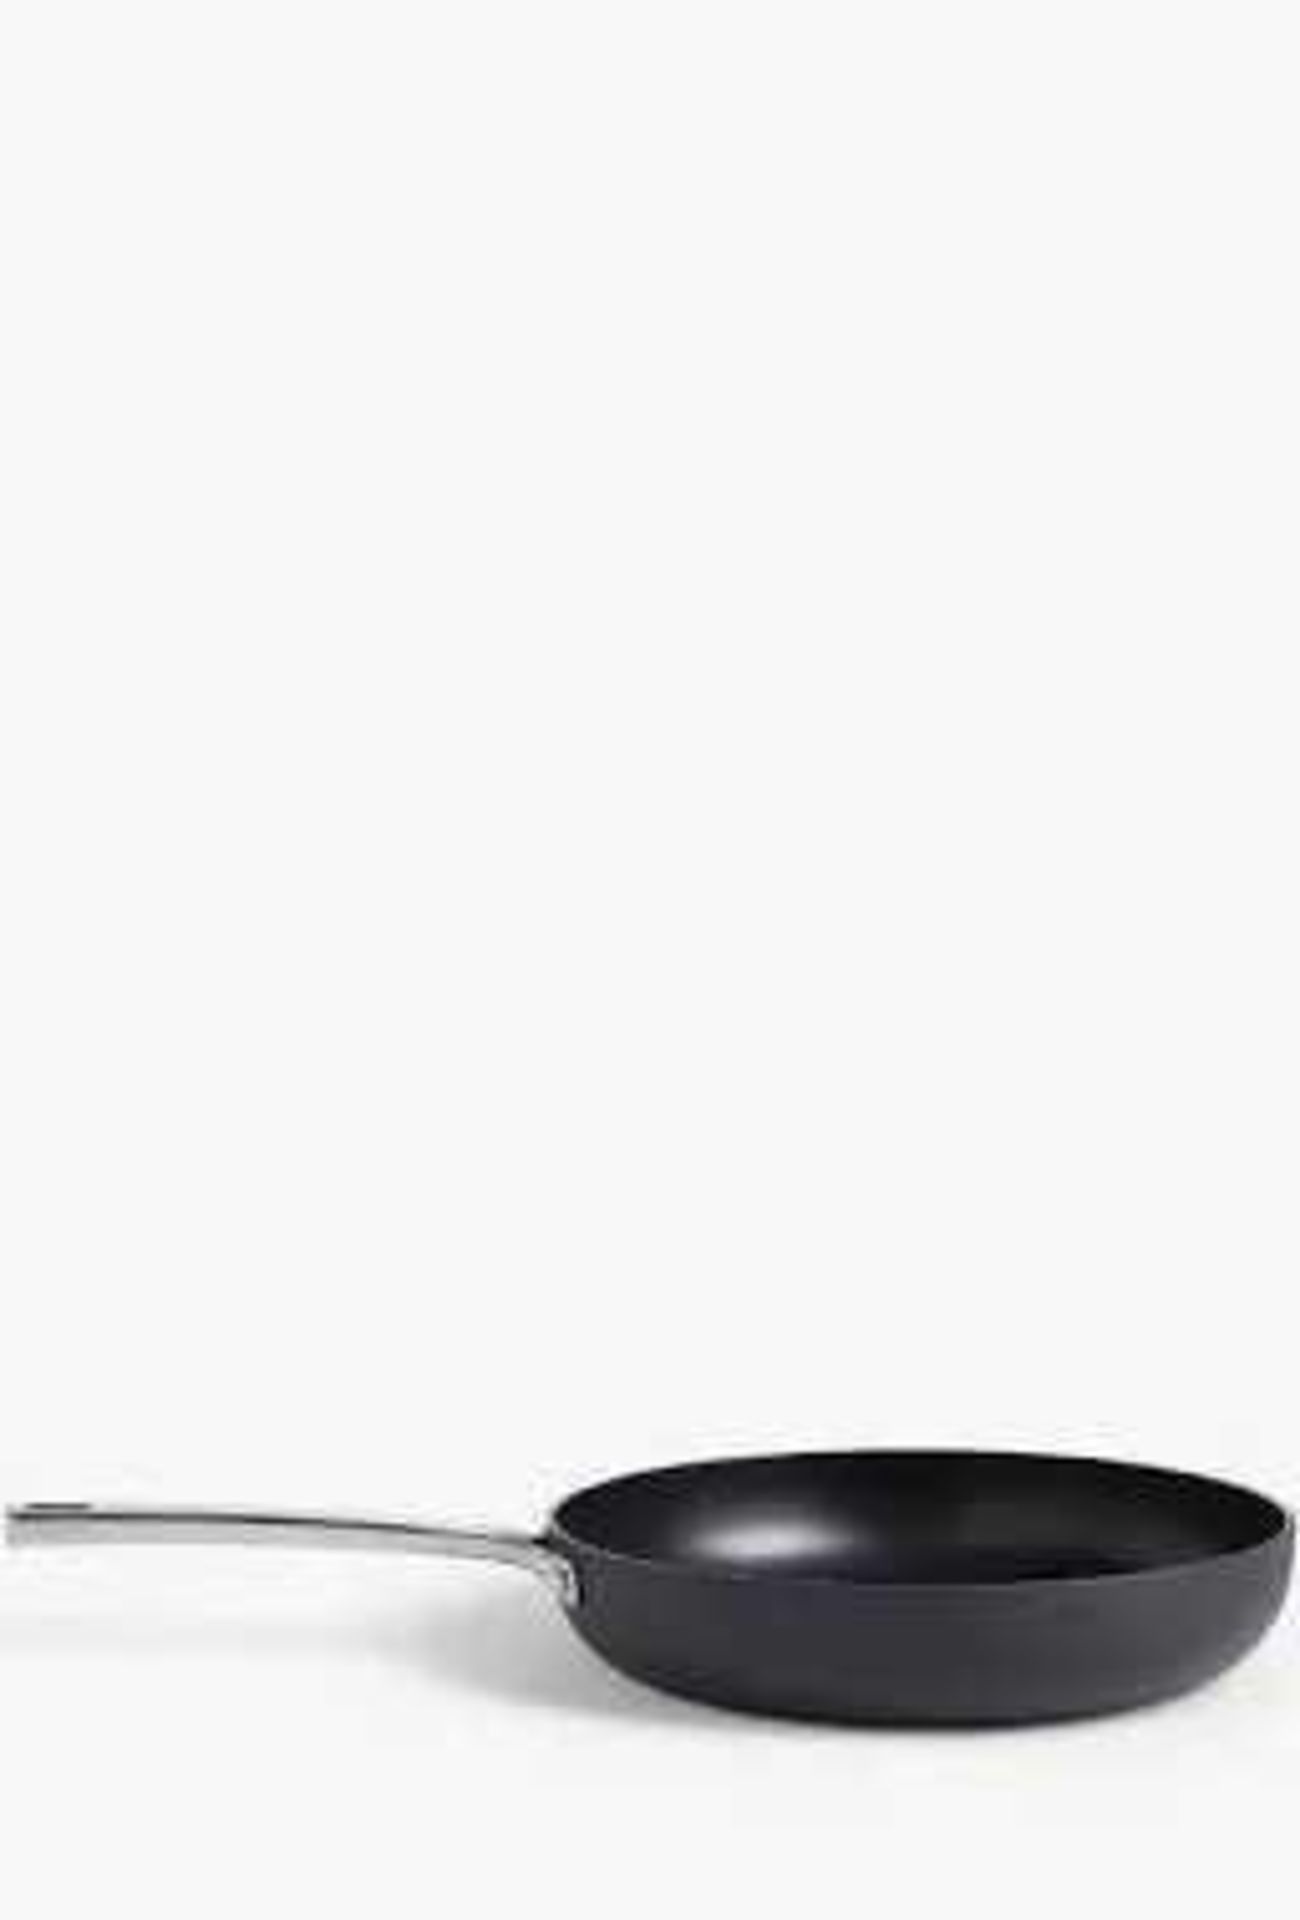 (At) RRP £395 Lot To Contain 1 X John Lewis Stockpot With Lid 1 X John Lewis SautÃ© Pan With Lid 1 X - Image 10 of 12